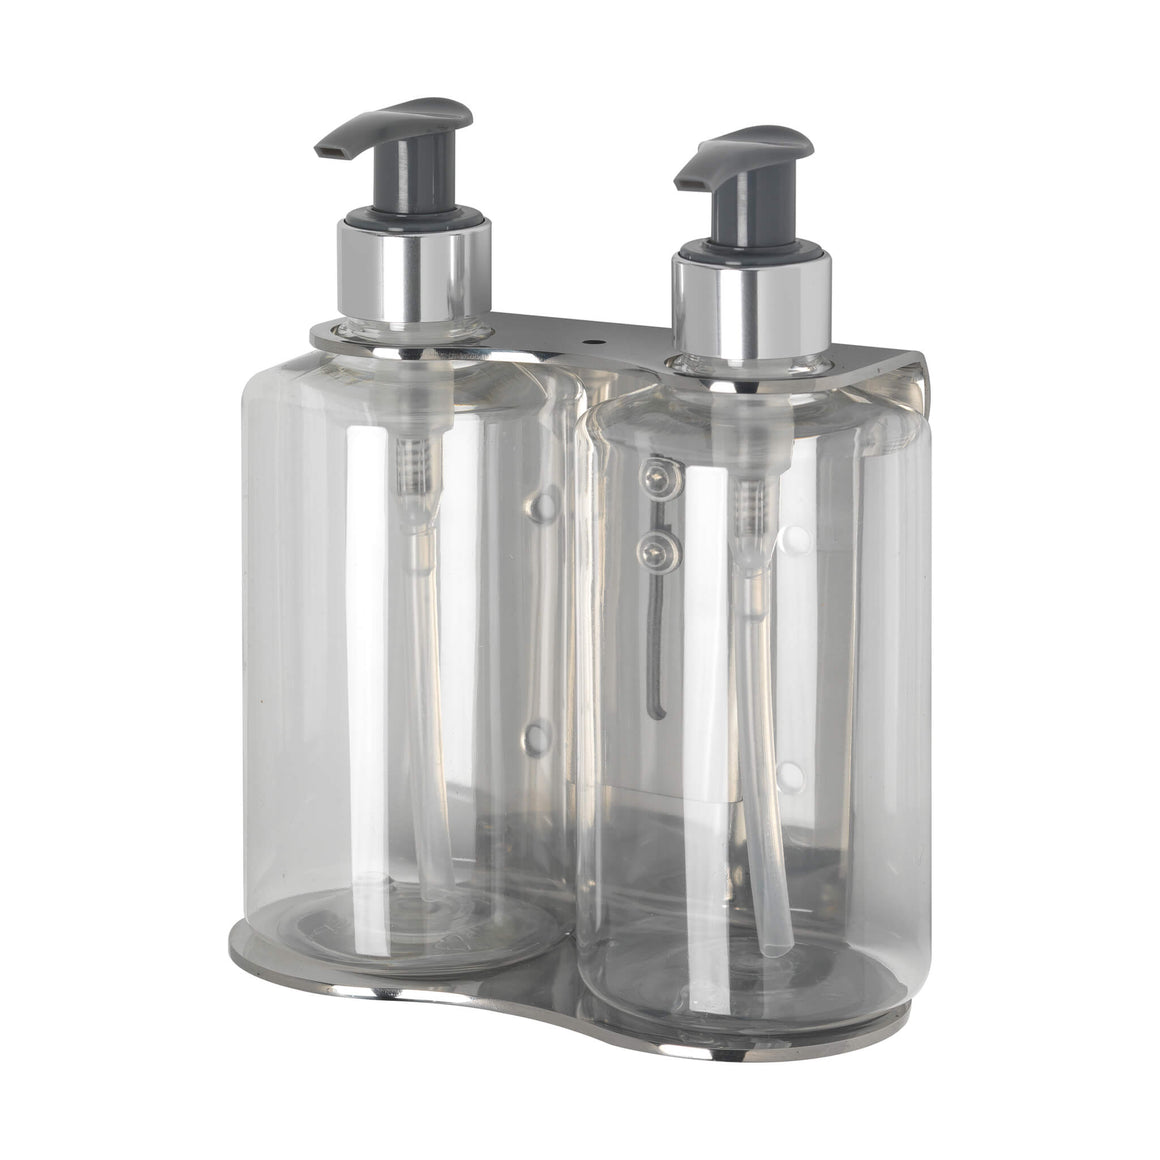 SALE ITEM - Double 500ml Standard Wall-Mounted Holder Hand Polished Finish